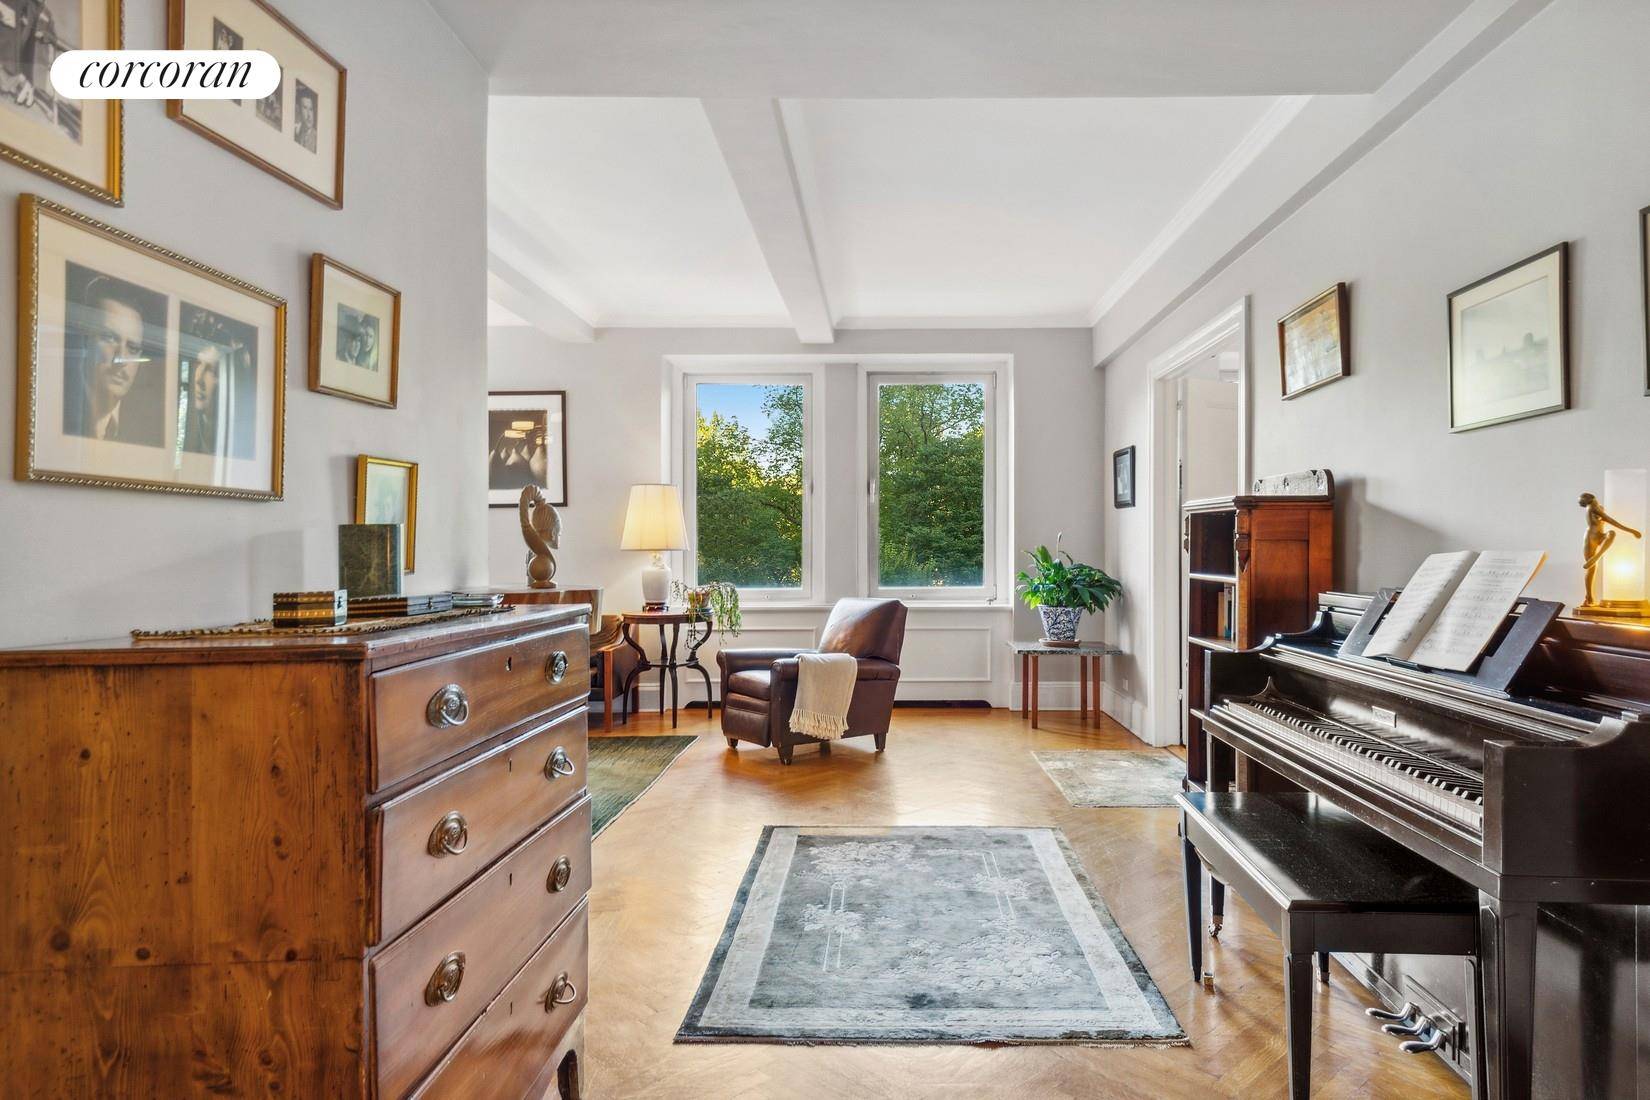 1215 Fifth Avenue, Apt. 5B with sweeping Central Park views is a beautiful, expansive, sunny 8 room pre war on Fifth Avenue, now offered at 3, 275M.